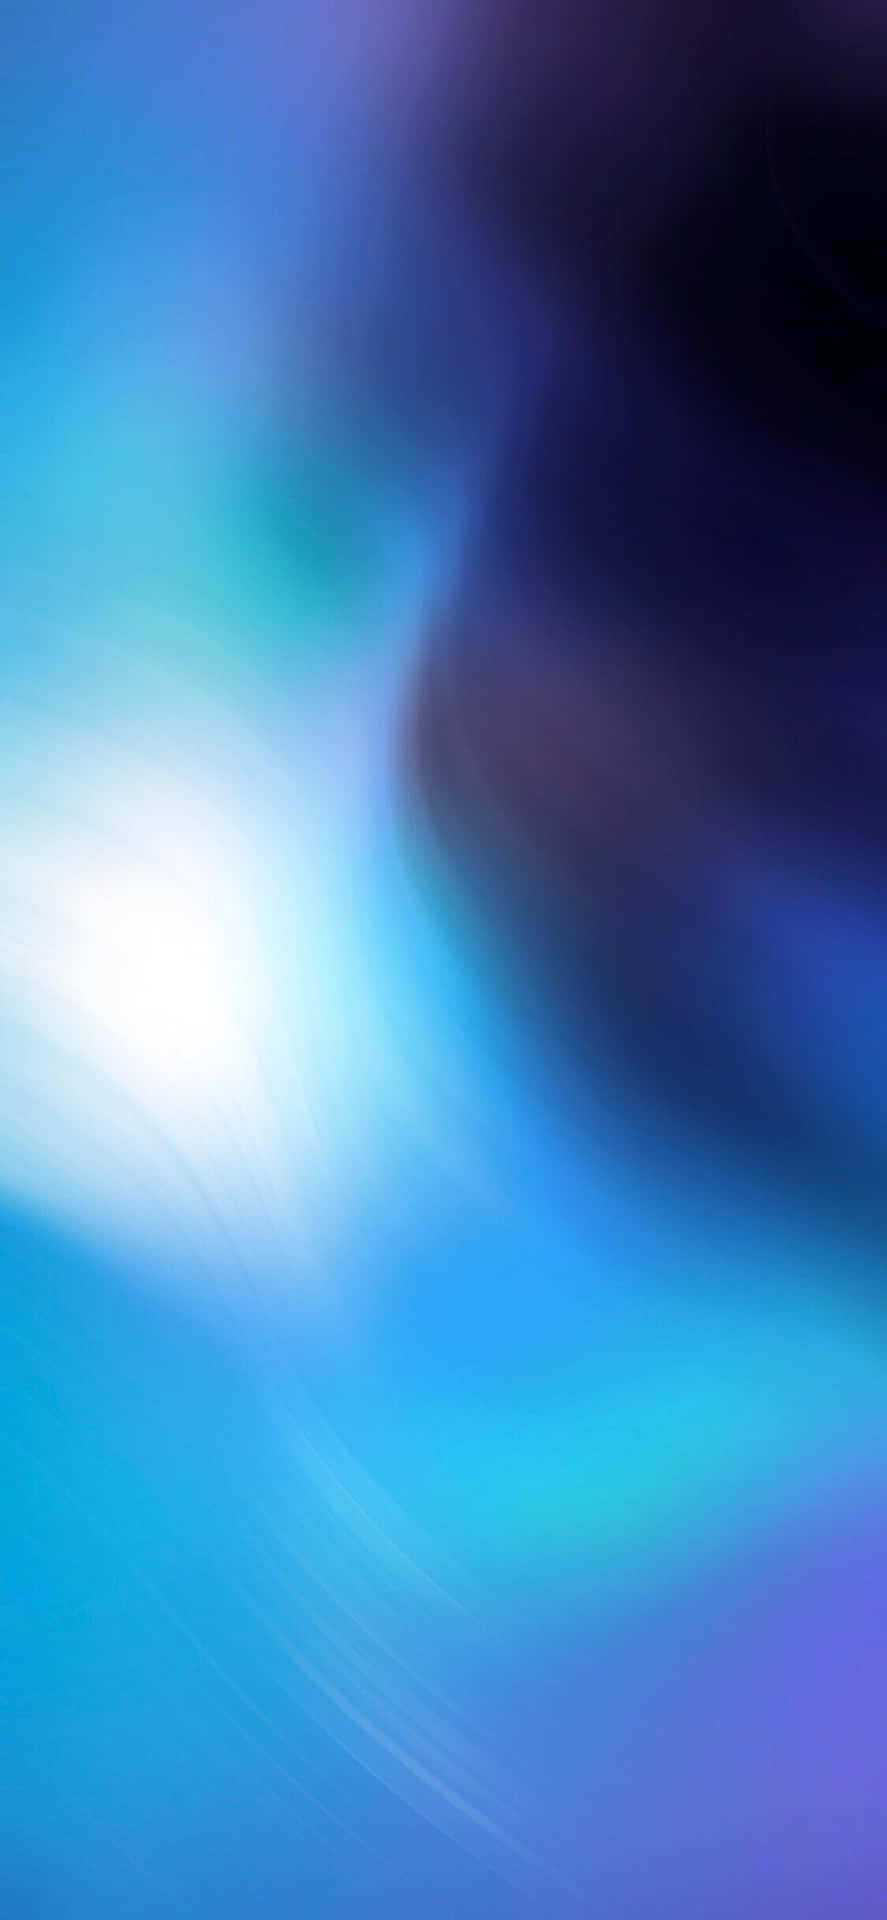 Iphone X Abstract Bright Blue Wallpaper